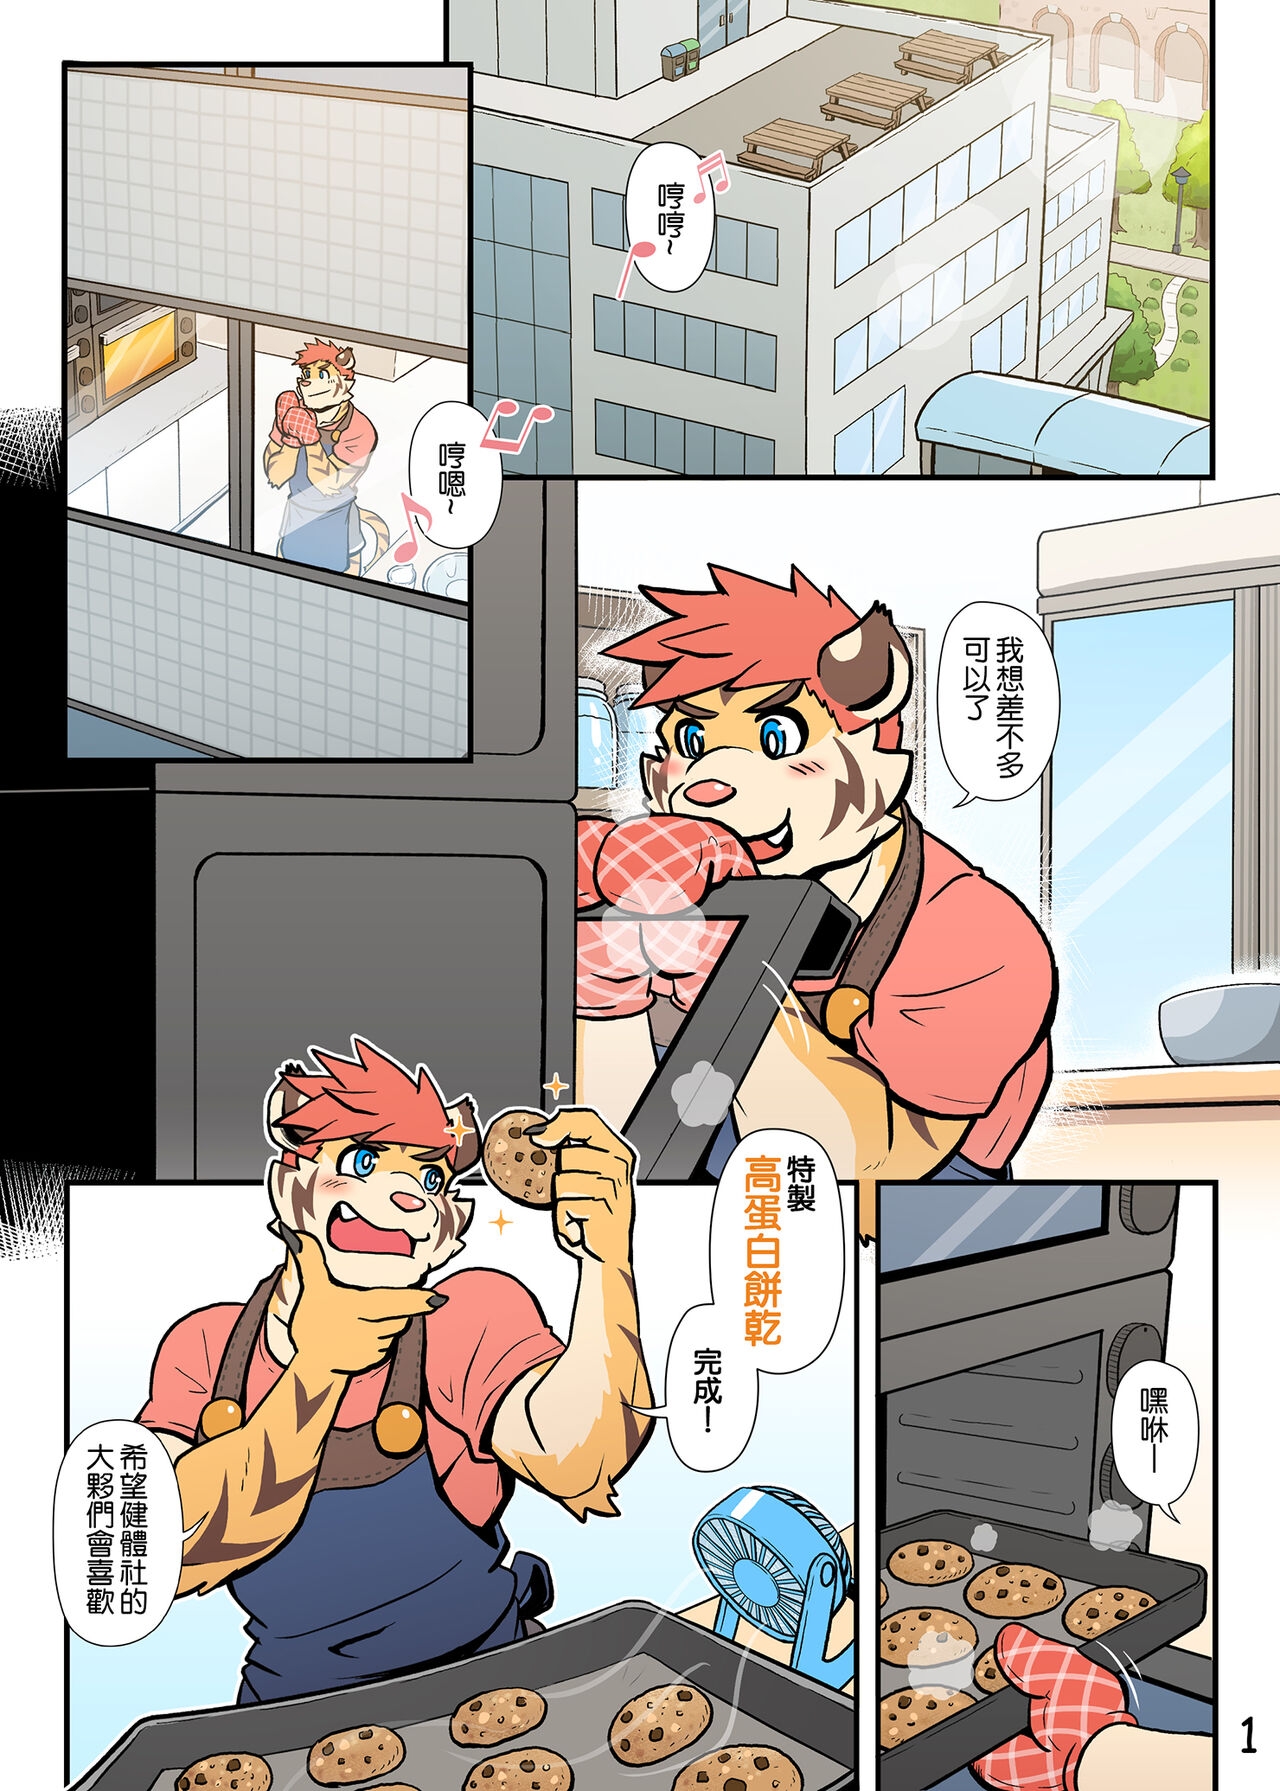 [Ripple Moon] My Milky Roomie 2: Milk Bath (Ongoing) [Chinese] (Flat Color) 2